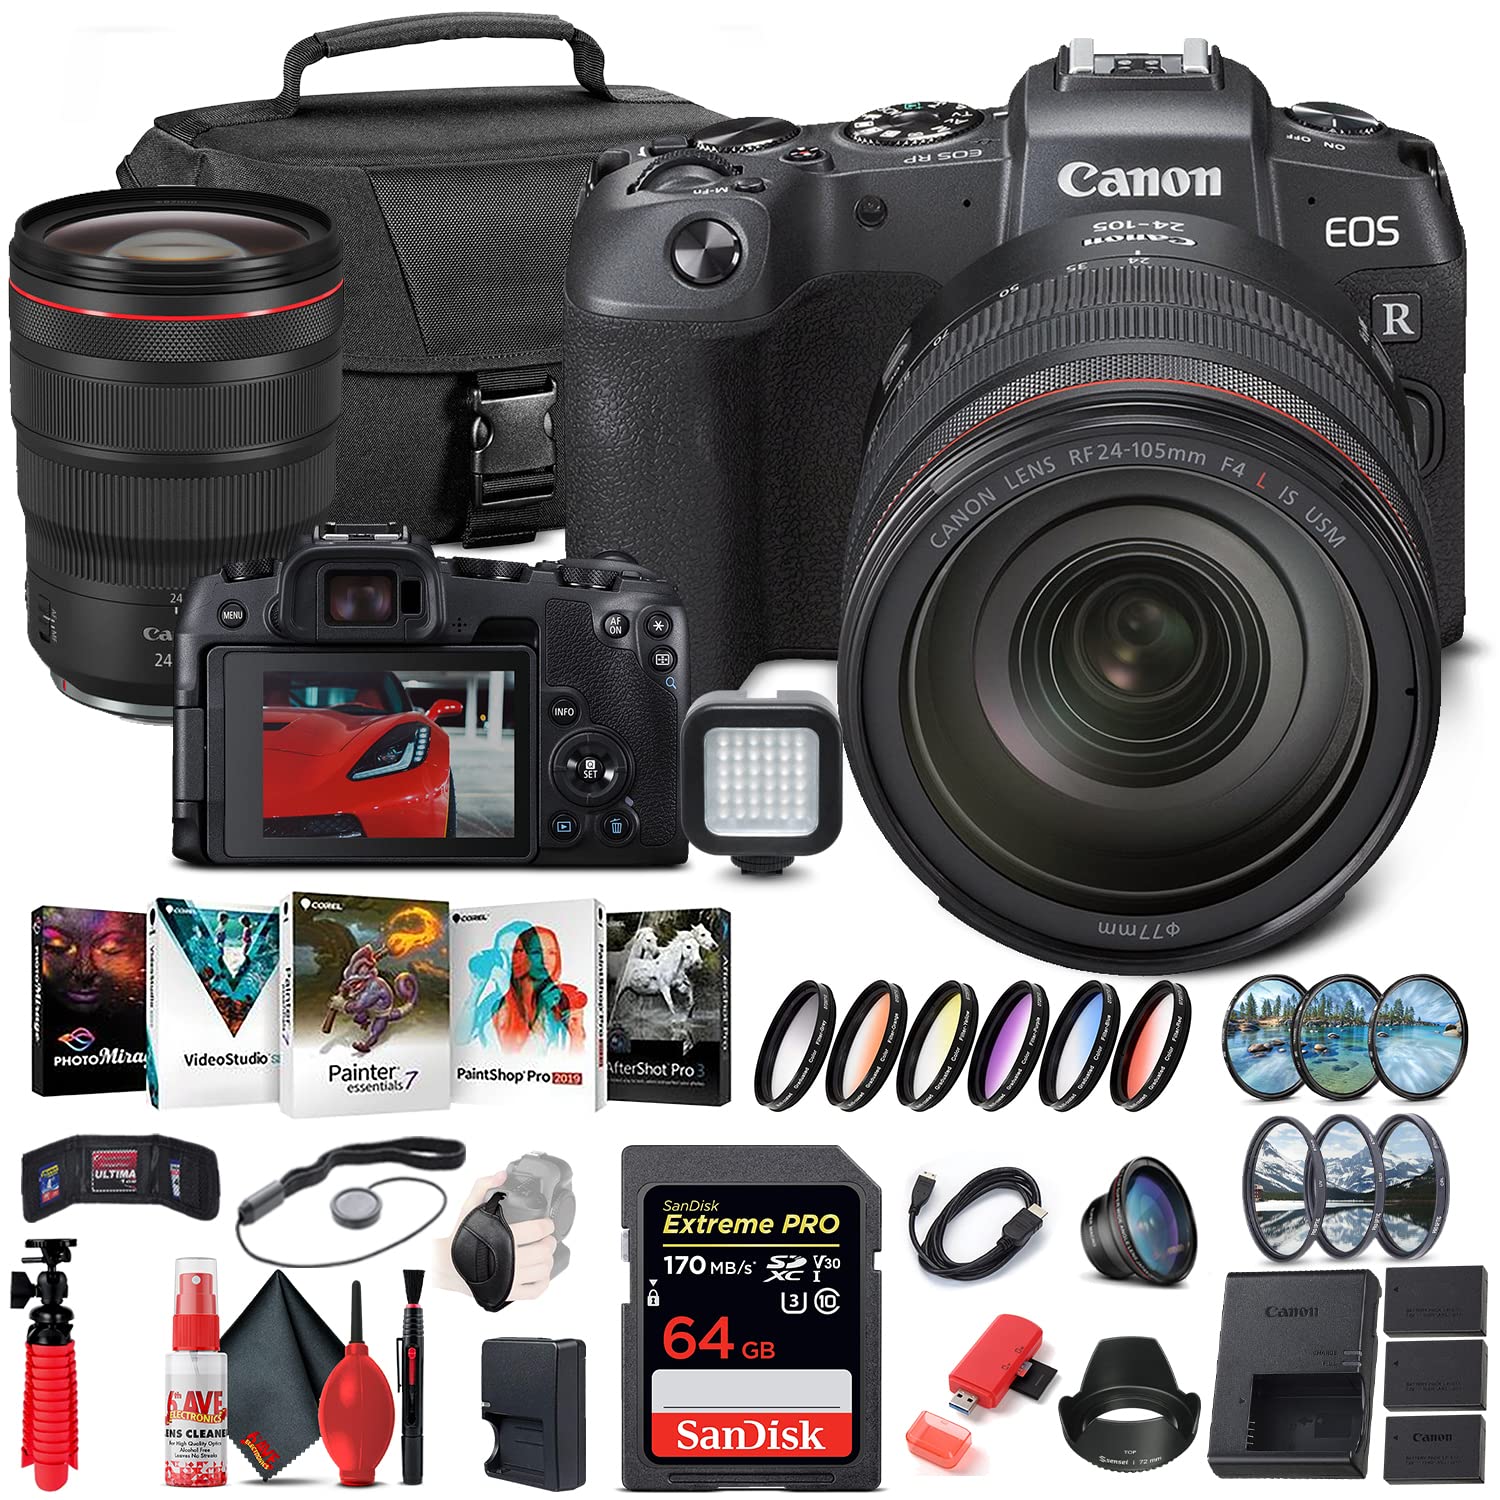 Canon EOS RP Mirrorless Digital Camera with 24-105mm Lens (3380C012) + Canon RF 24-70mm Lens + 64GB Memory Card + Color Filter Kit + Case + Filter Kit + Corel Photo Software + More (Renewed)